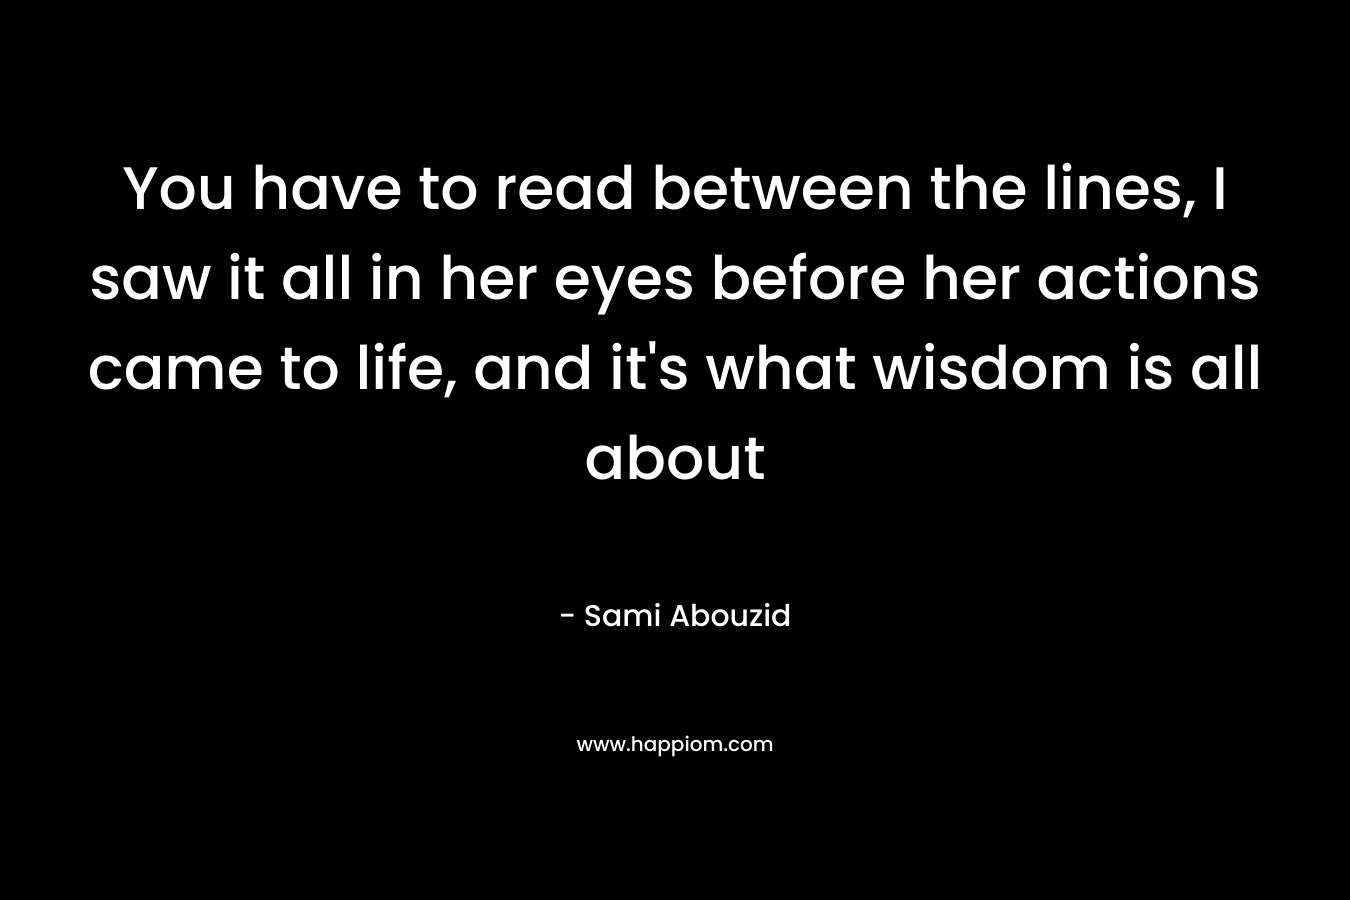 You have to read between the lines, I saw it all in her eyes before her actions came to life, and it’s what wisdom is all about – Sami Abouzid